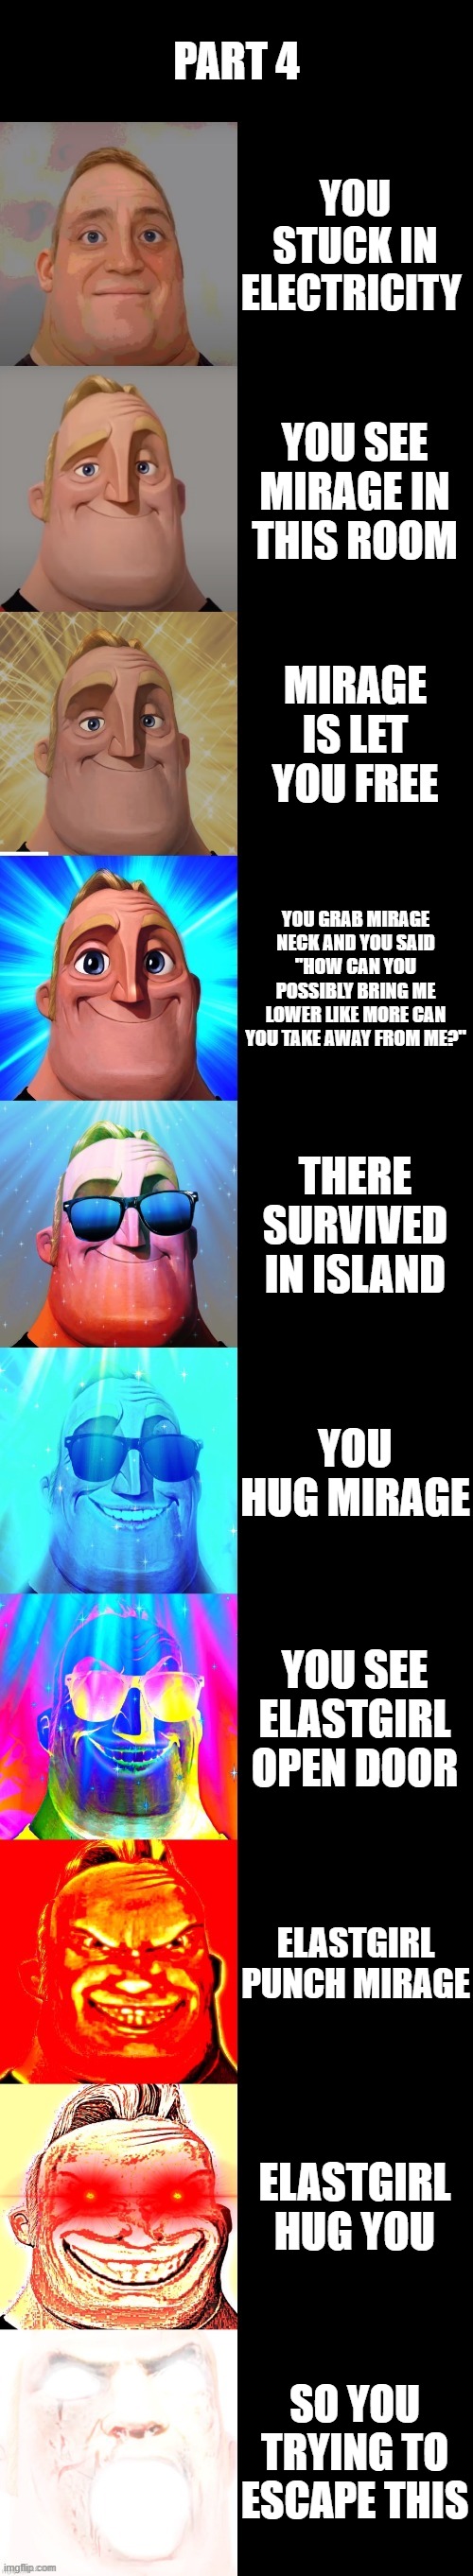 mr incredible becoming canny | PART 4; YOU STUCK IN ELECTRICITY; YOU SEE MIRAGE IN THIS ROOM; MIRAGE IS LET YOU FREE; YOU GRAB MIRAGE NECK AND YOU SAID "HOW CAN YOU POSSIBLY BRING ME LOWER LIKE MORE CAN YOU TAKE AWAY FROM ME?"; THERE SURVIVED IN ISLAND; YOU HUG MIRAGE; YOU SEE ELASTGIRL OPEN DOOR; ELASTGIRL PUNCH MIRAGE; ELASTGIRL HUG YOU; SO YOU TRYING TO ESCAPE THIS | image tagged in mr incredible becoming canny | made w/ Imgflip meme maker